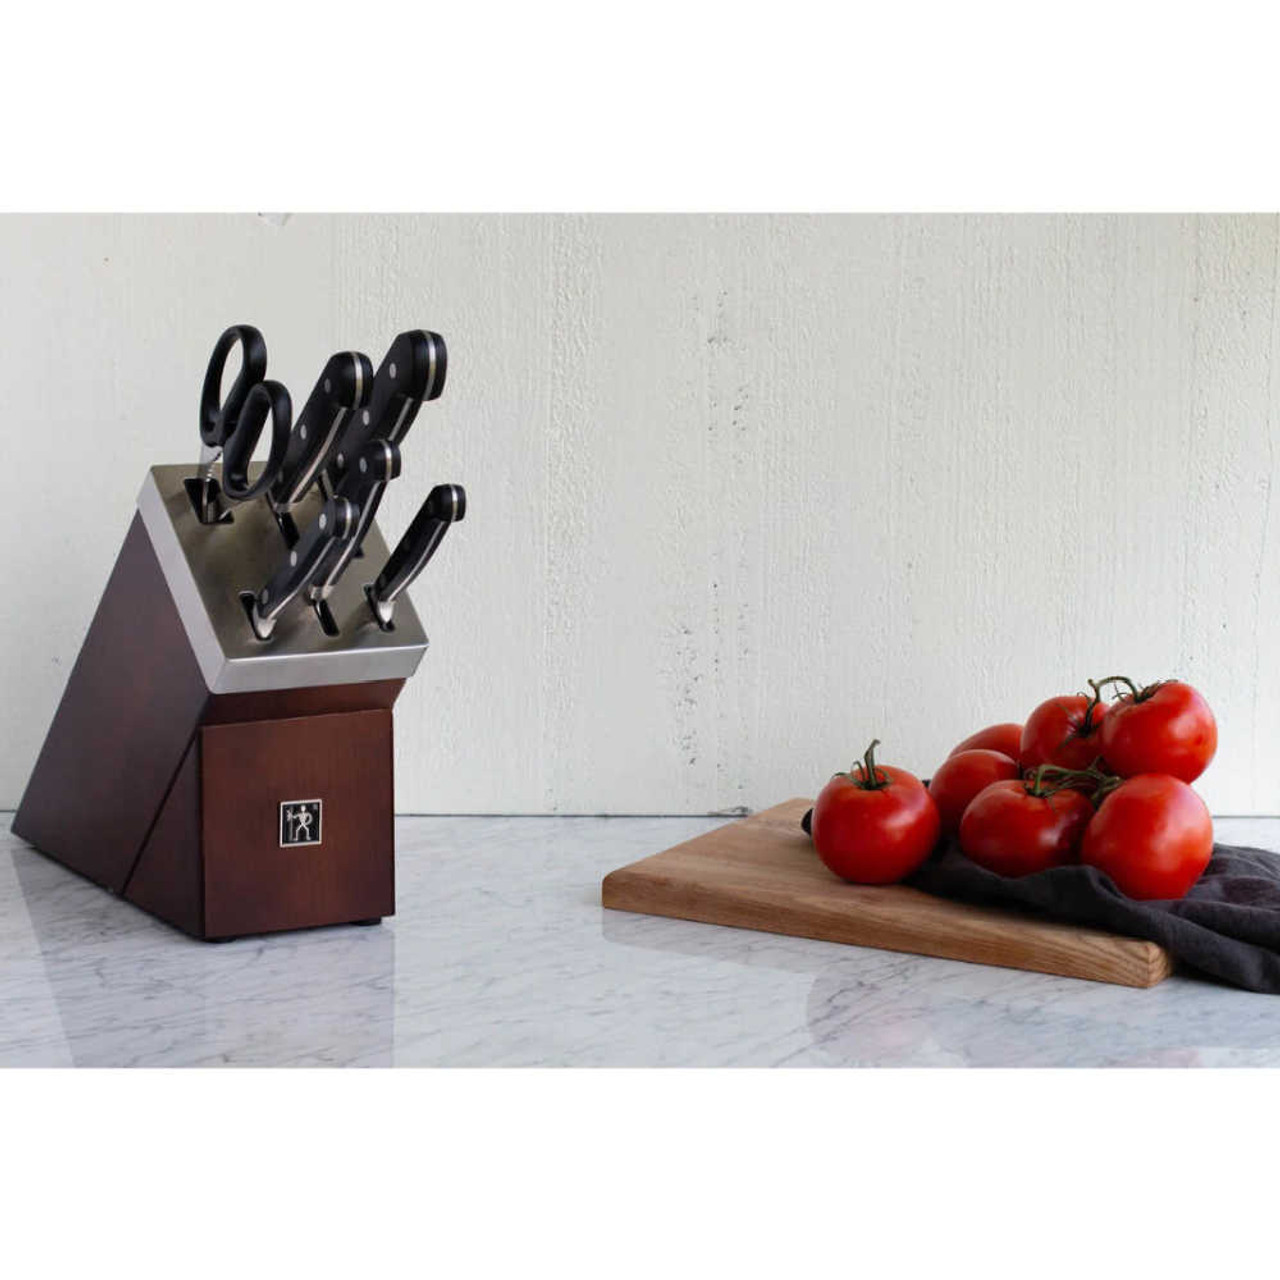 https://cdn11.bigcommerce.com/s-hccytny0od/images/stencil/1280x1280/products/5171/22351/Henckels_Classic_7-Piece_Self-Sharpening_Knife_Block_Set_2__00695.1668889202.jpg?c=2?imbypass=on